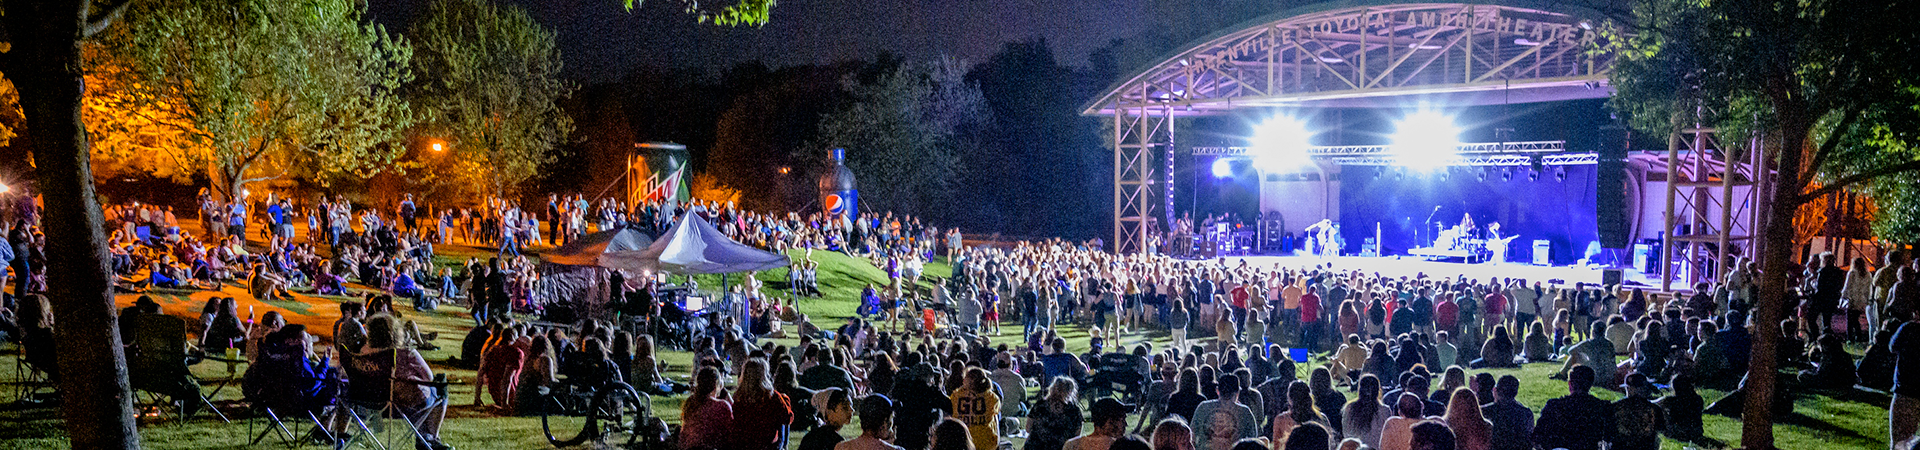 night concert at the Town Common